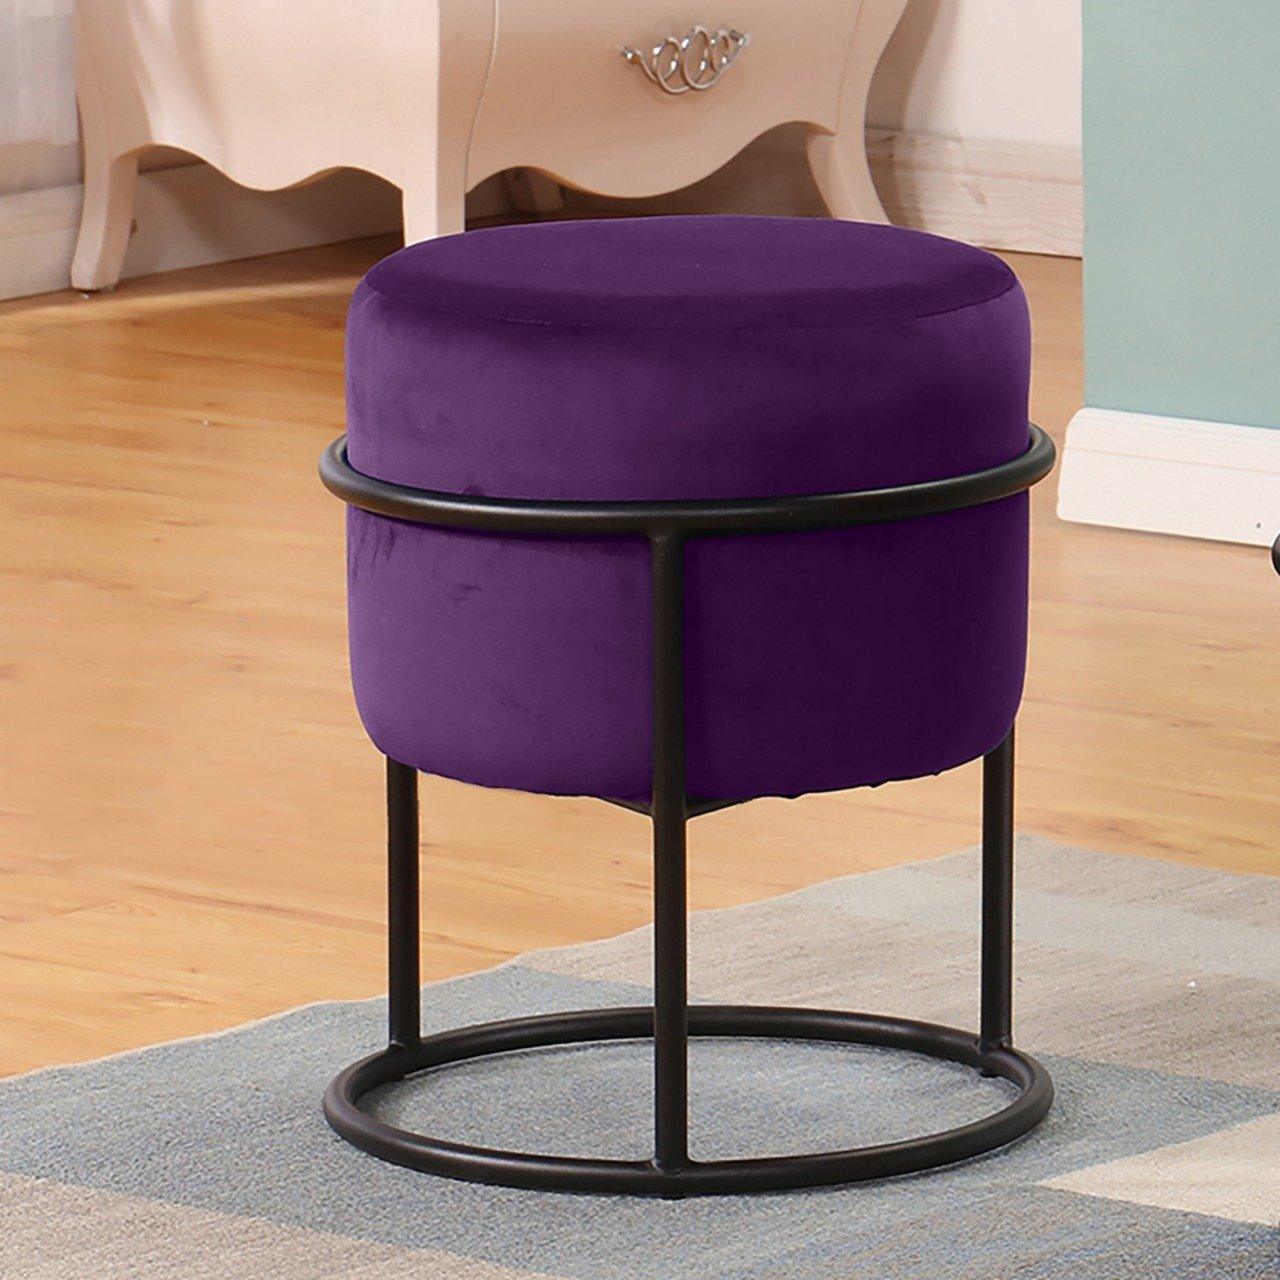 Luxury Wooden Round stool With Steel Stand -345 - 92Bedding